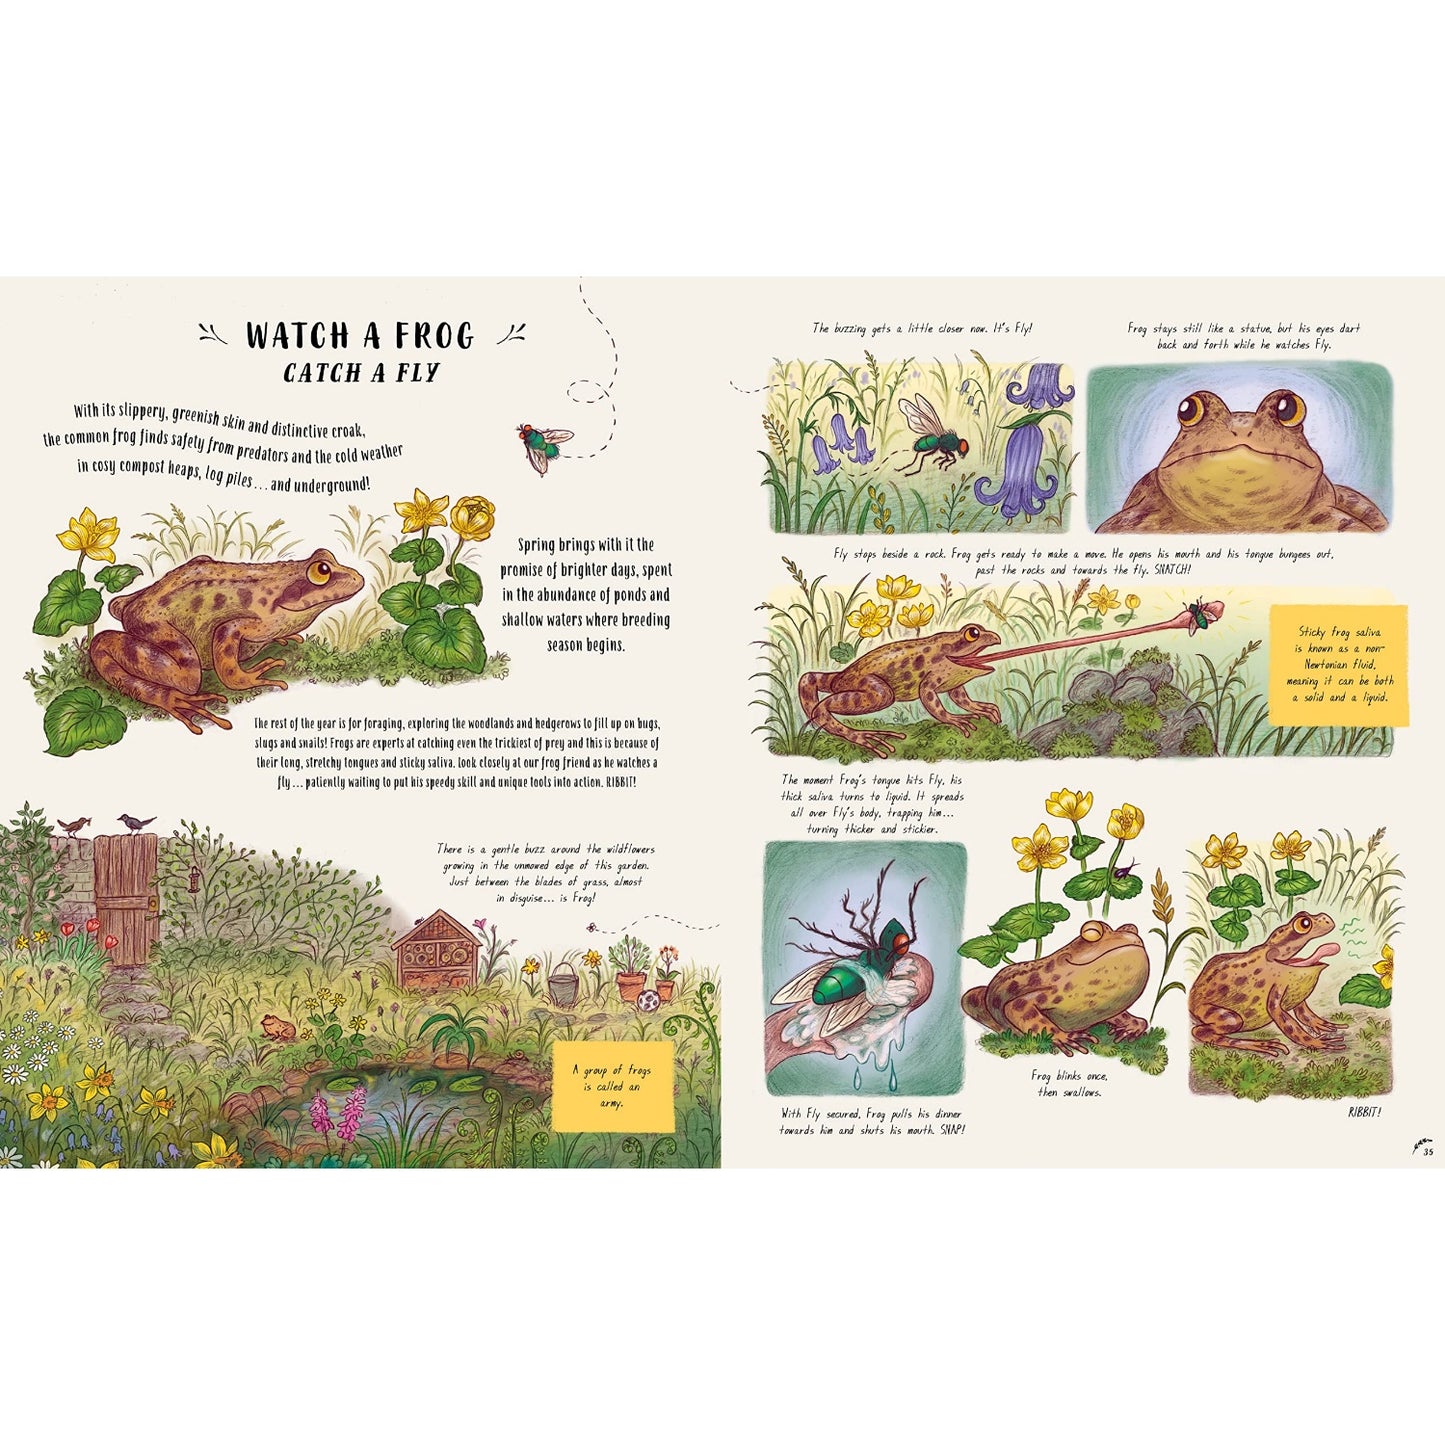 Slow Down and Be Here Now: More Nature Stories to Make You Stop, Look & Be Amazed | Children's Books on Nature